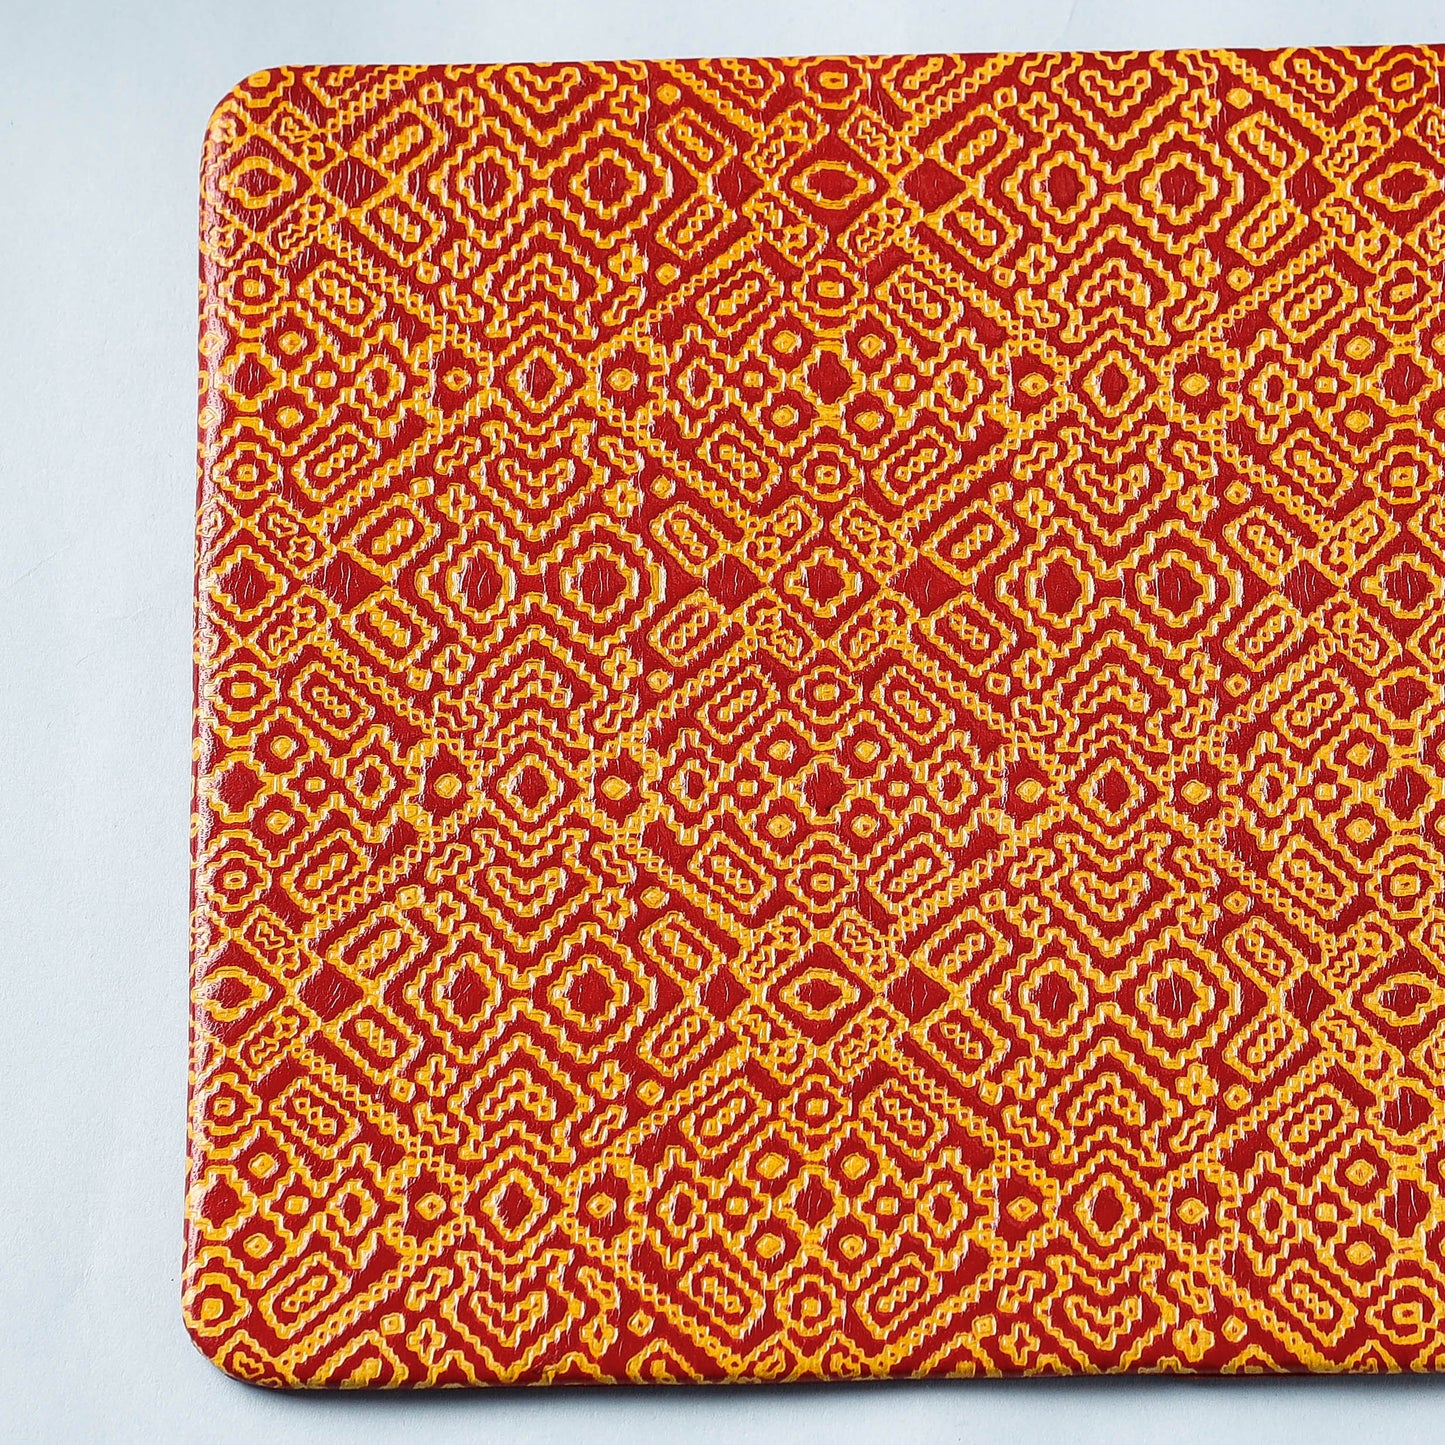 Handcrafted Embossed Leather Mouse Pad